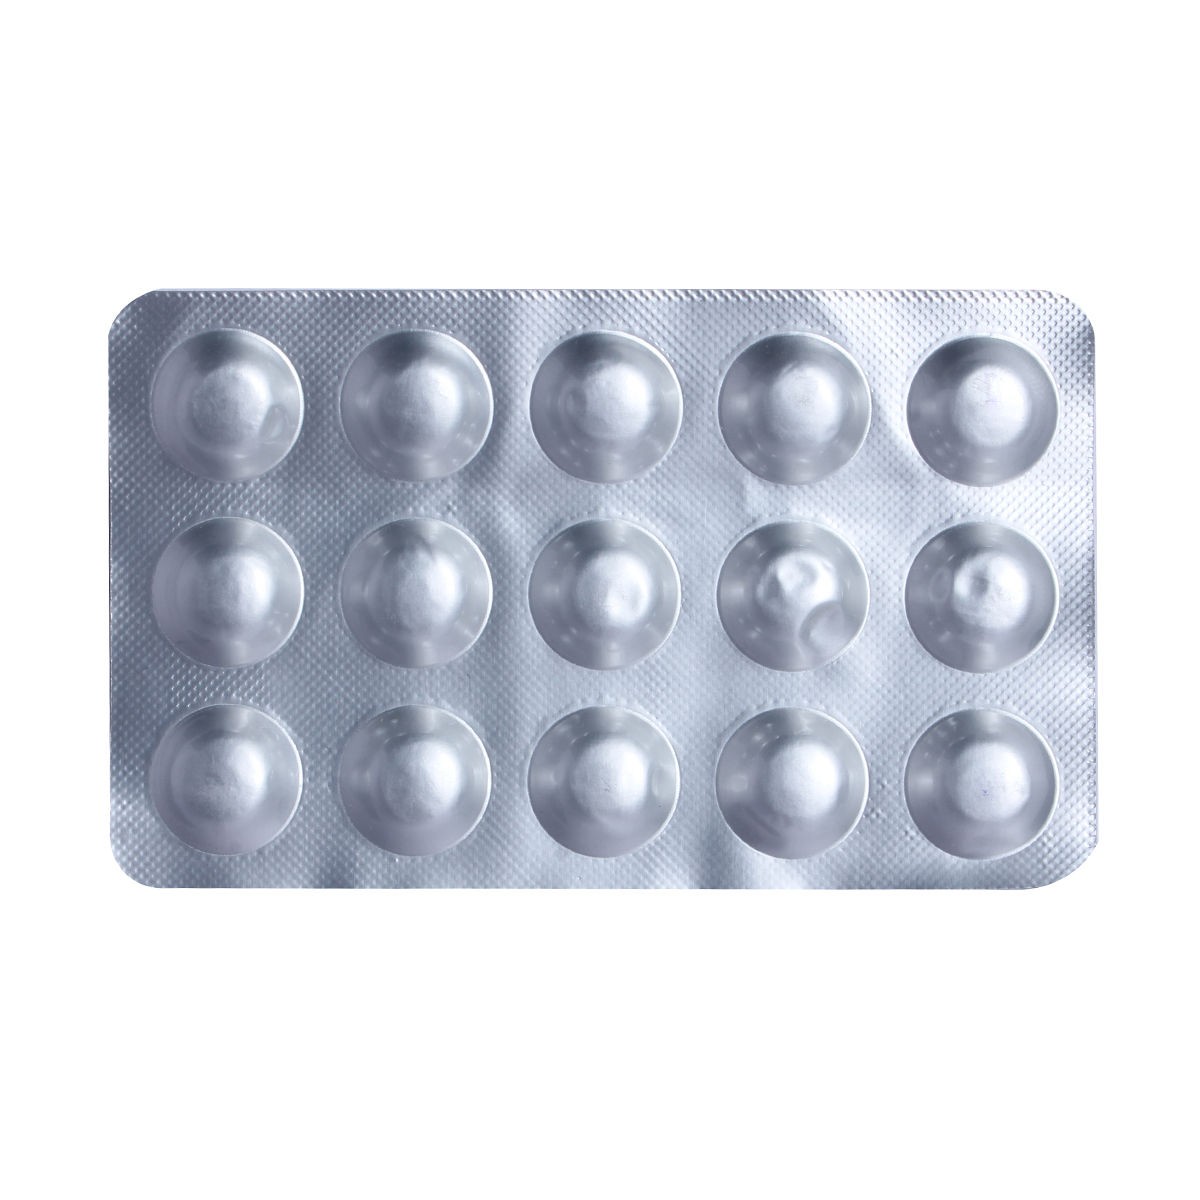 Ramistar-AM 5 Tablet 15's, Pack of 15 TabletS